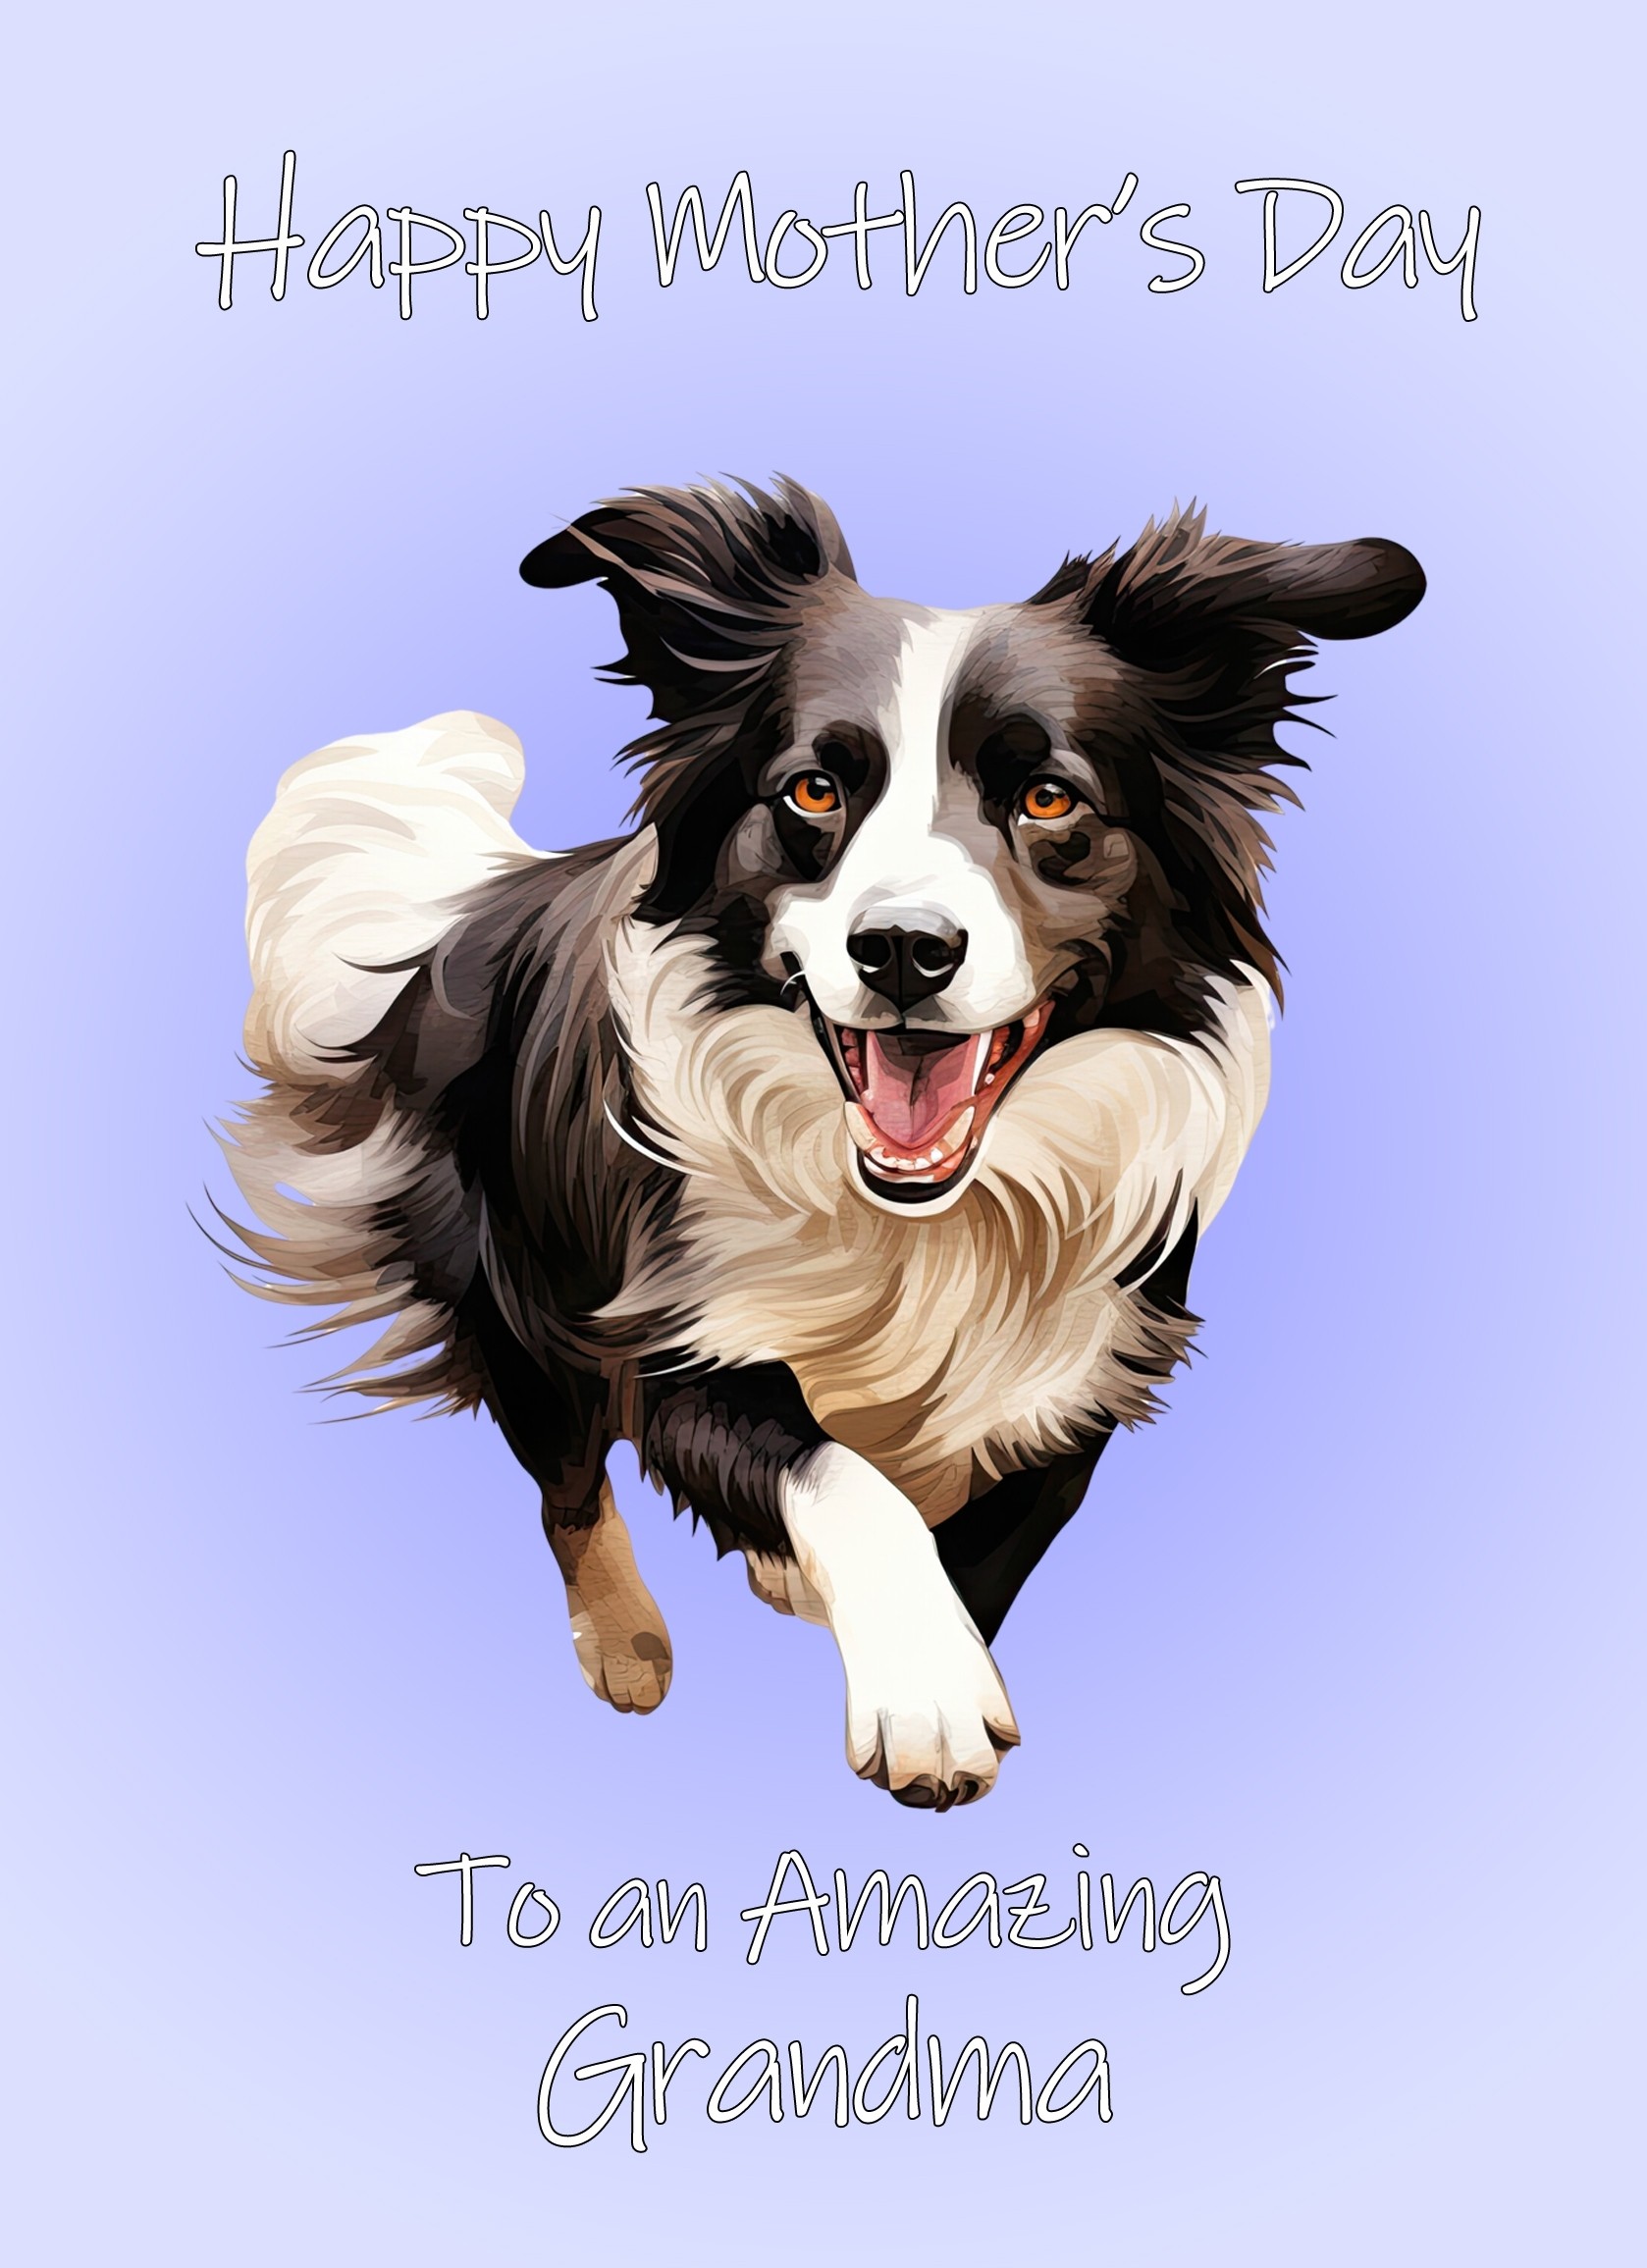 Border Collie Dog Mothers Day Card For Grandma